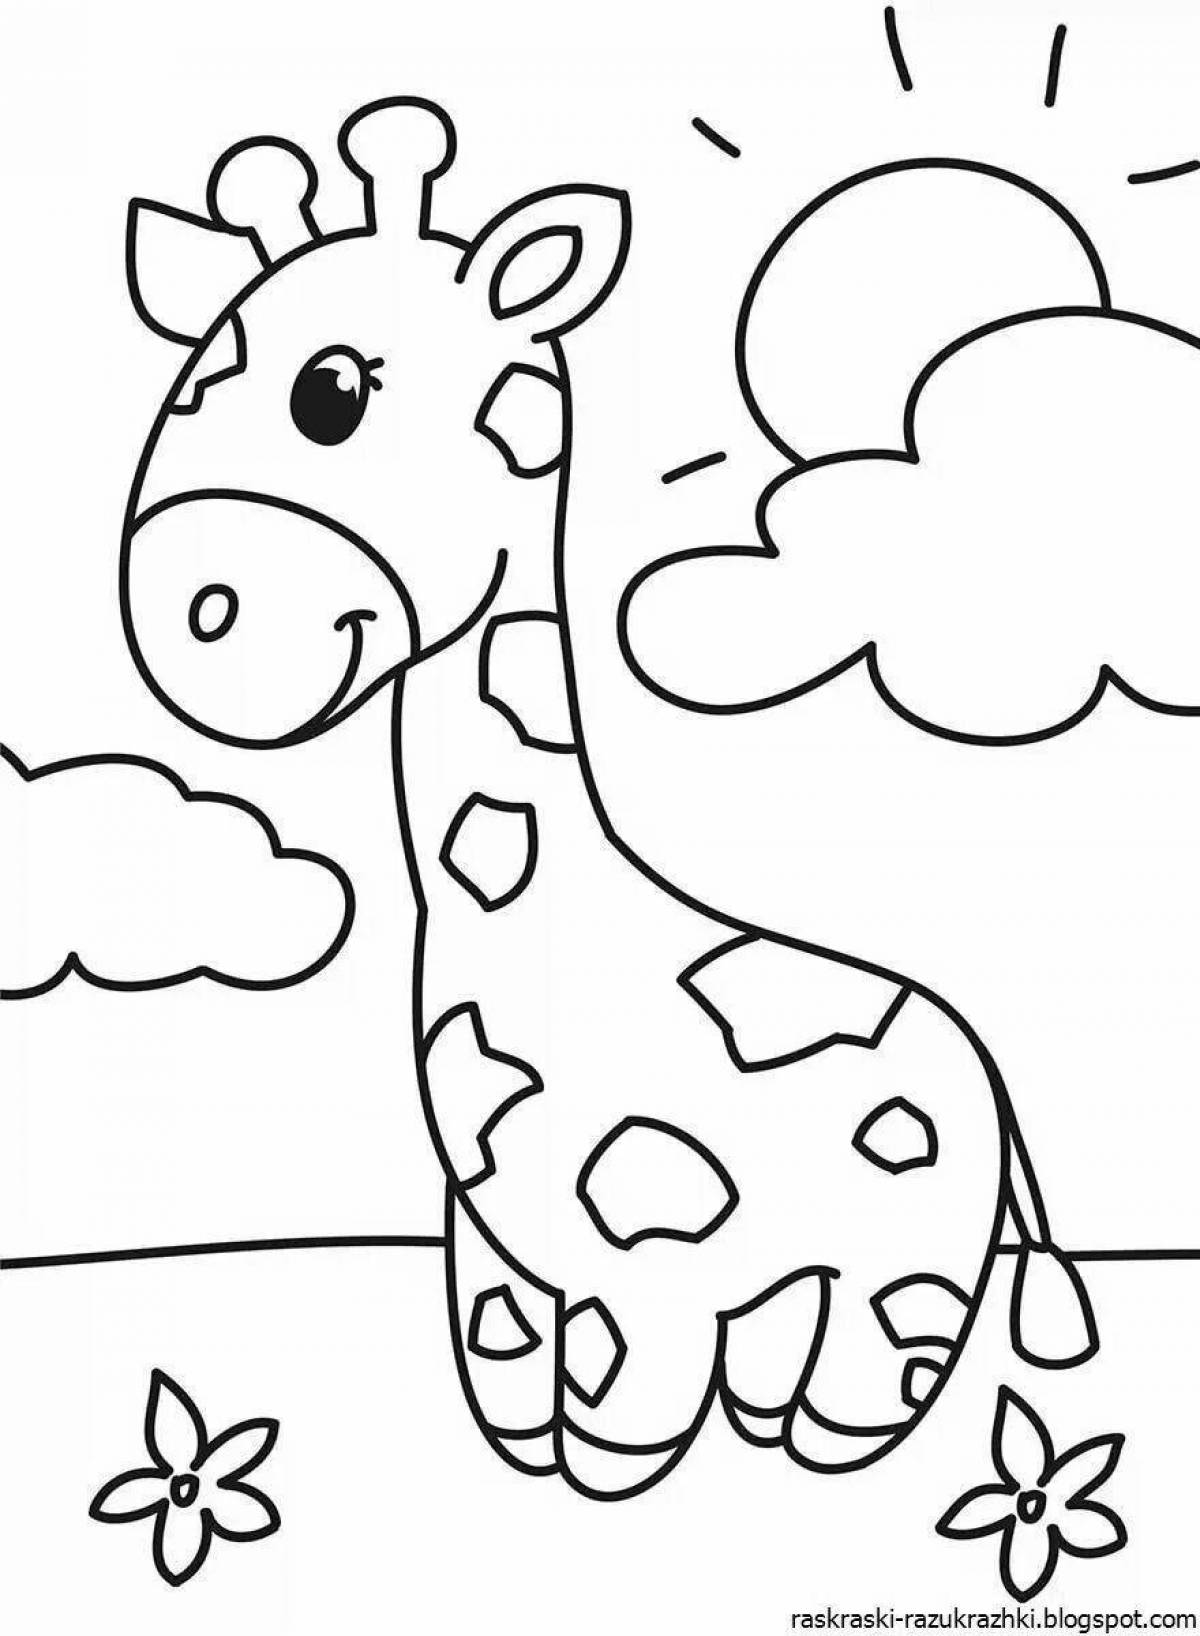 Coloring book for boys with animals 3 years old